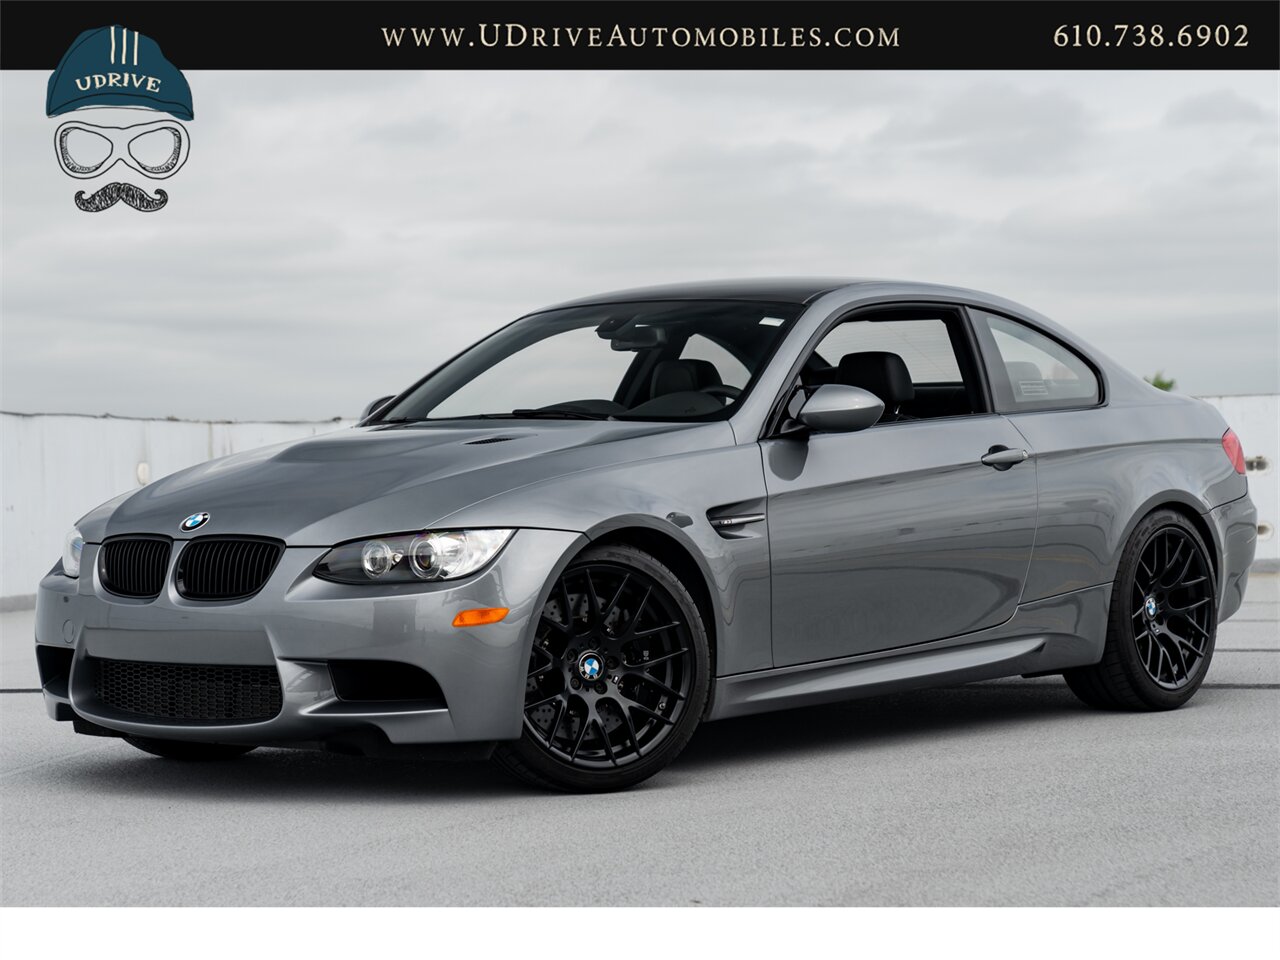 2012 BMW M3 E92 6 Speed 7k Miles Dinan Upgrades  GTS/359 Wheels Carbon Fiber Roof - Photo 1 - West Chester, PA 19382